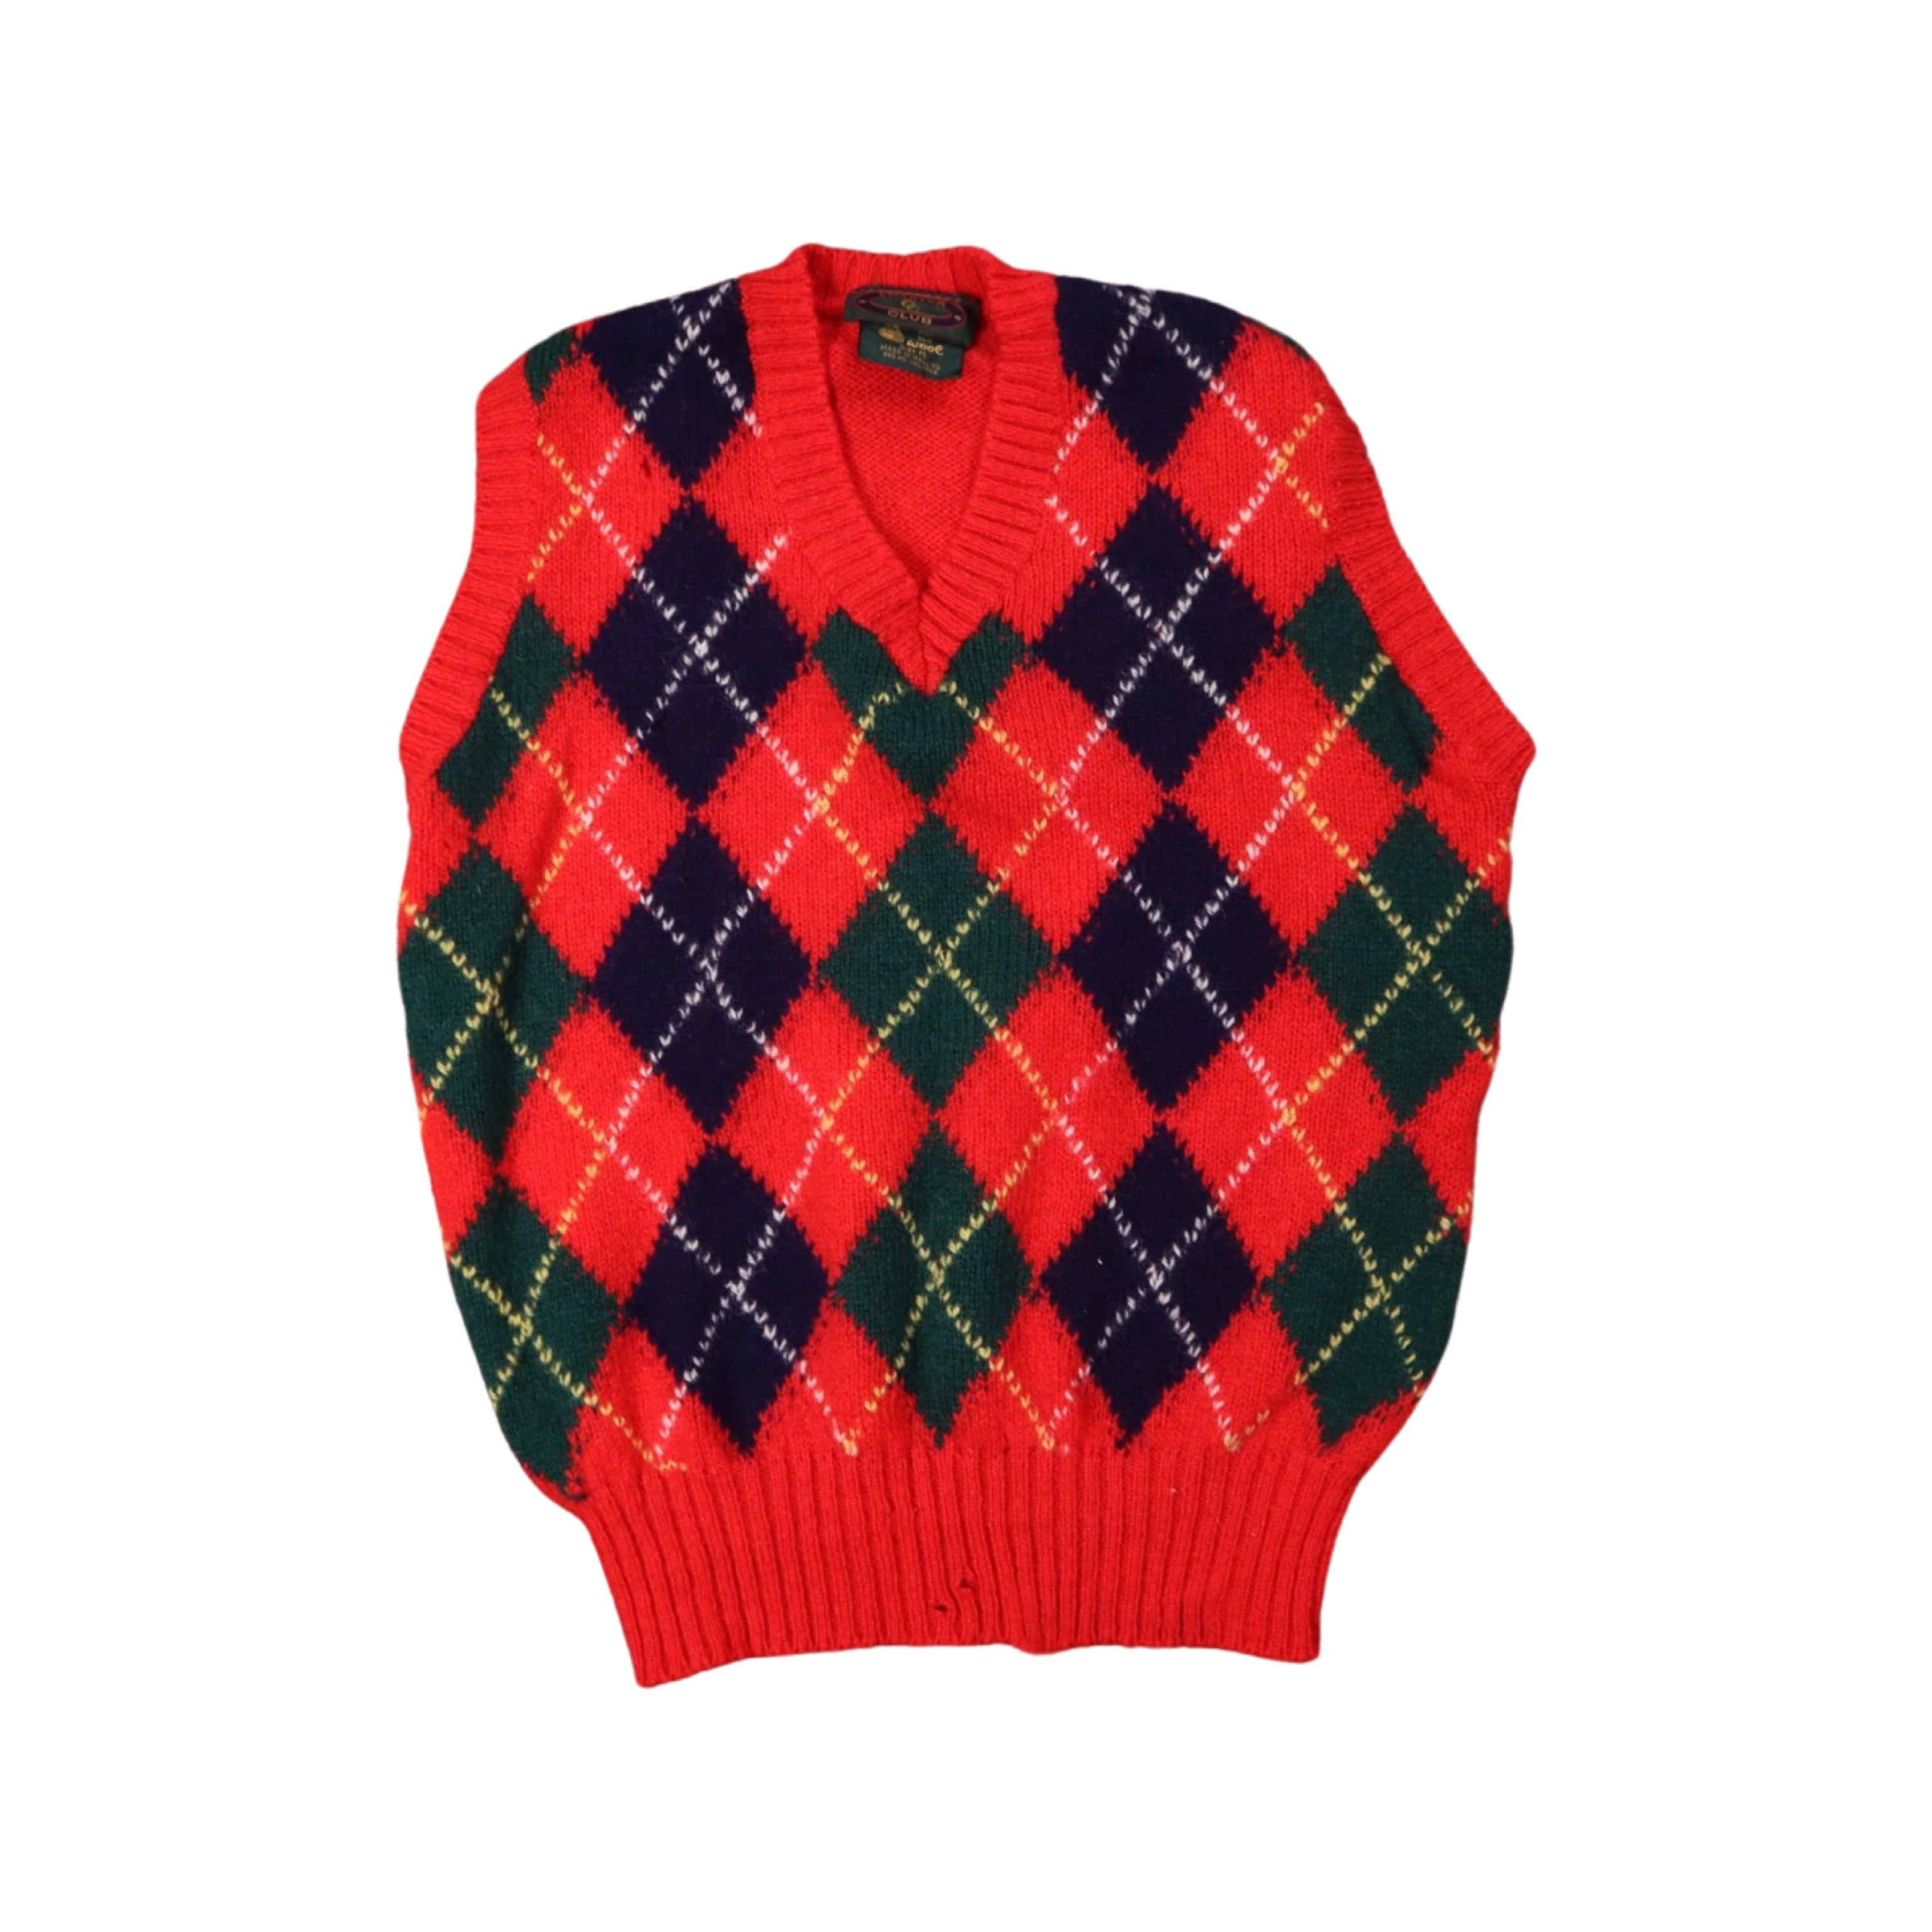 Red Argyle 90s Knit Sweater Vest (Small)